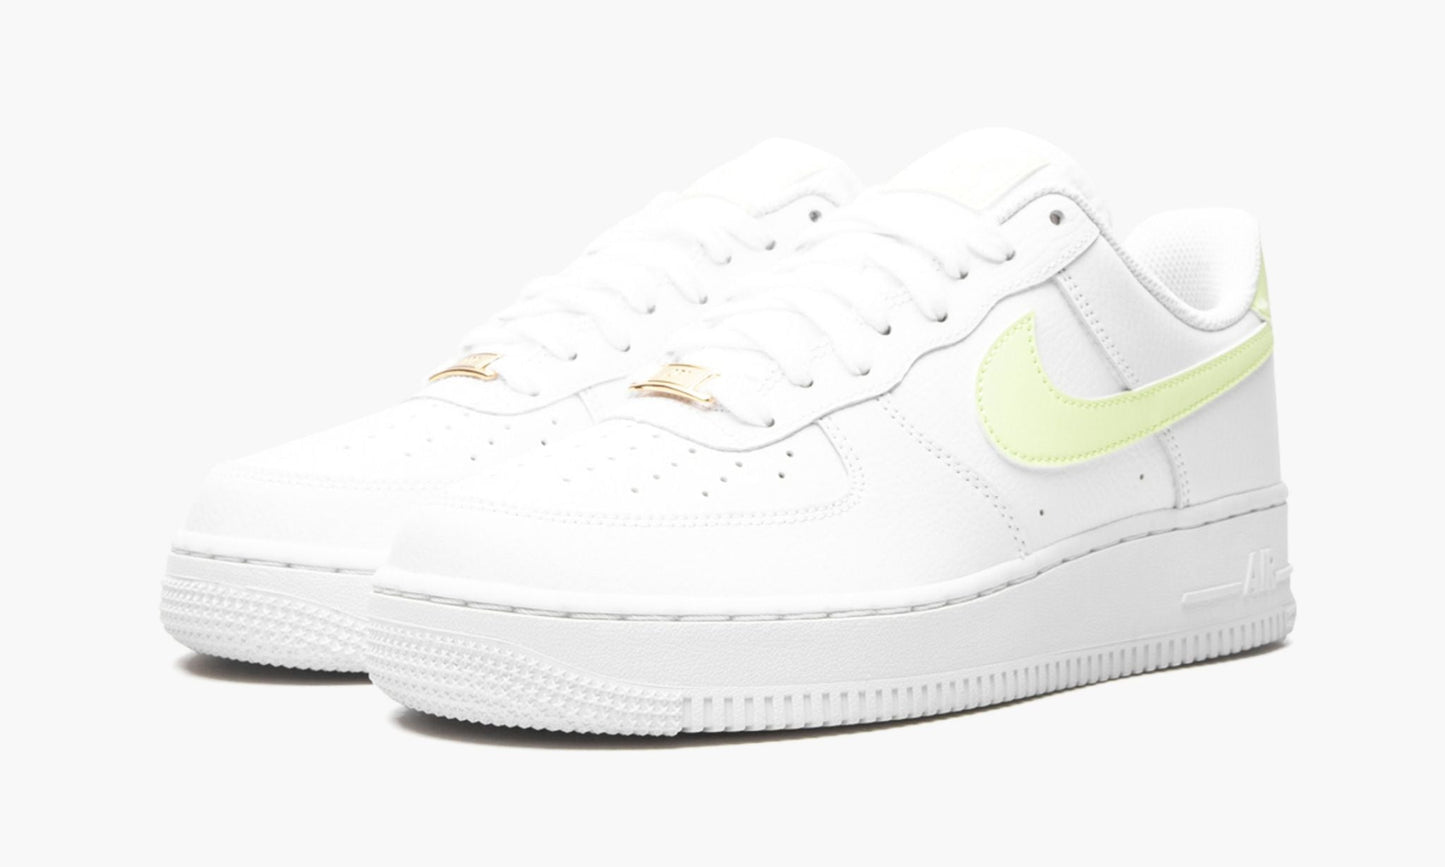 WMNS Air Force 1 Low "White / Barely Volt"